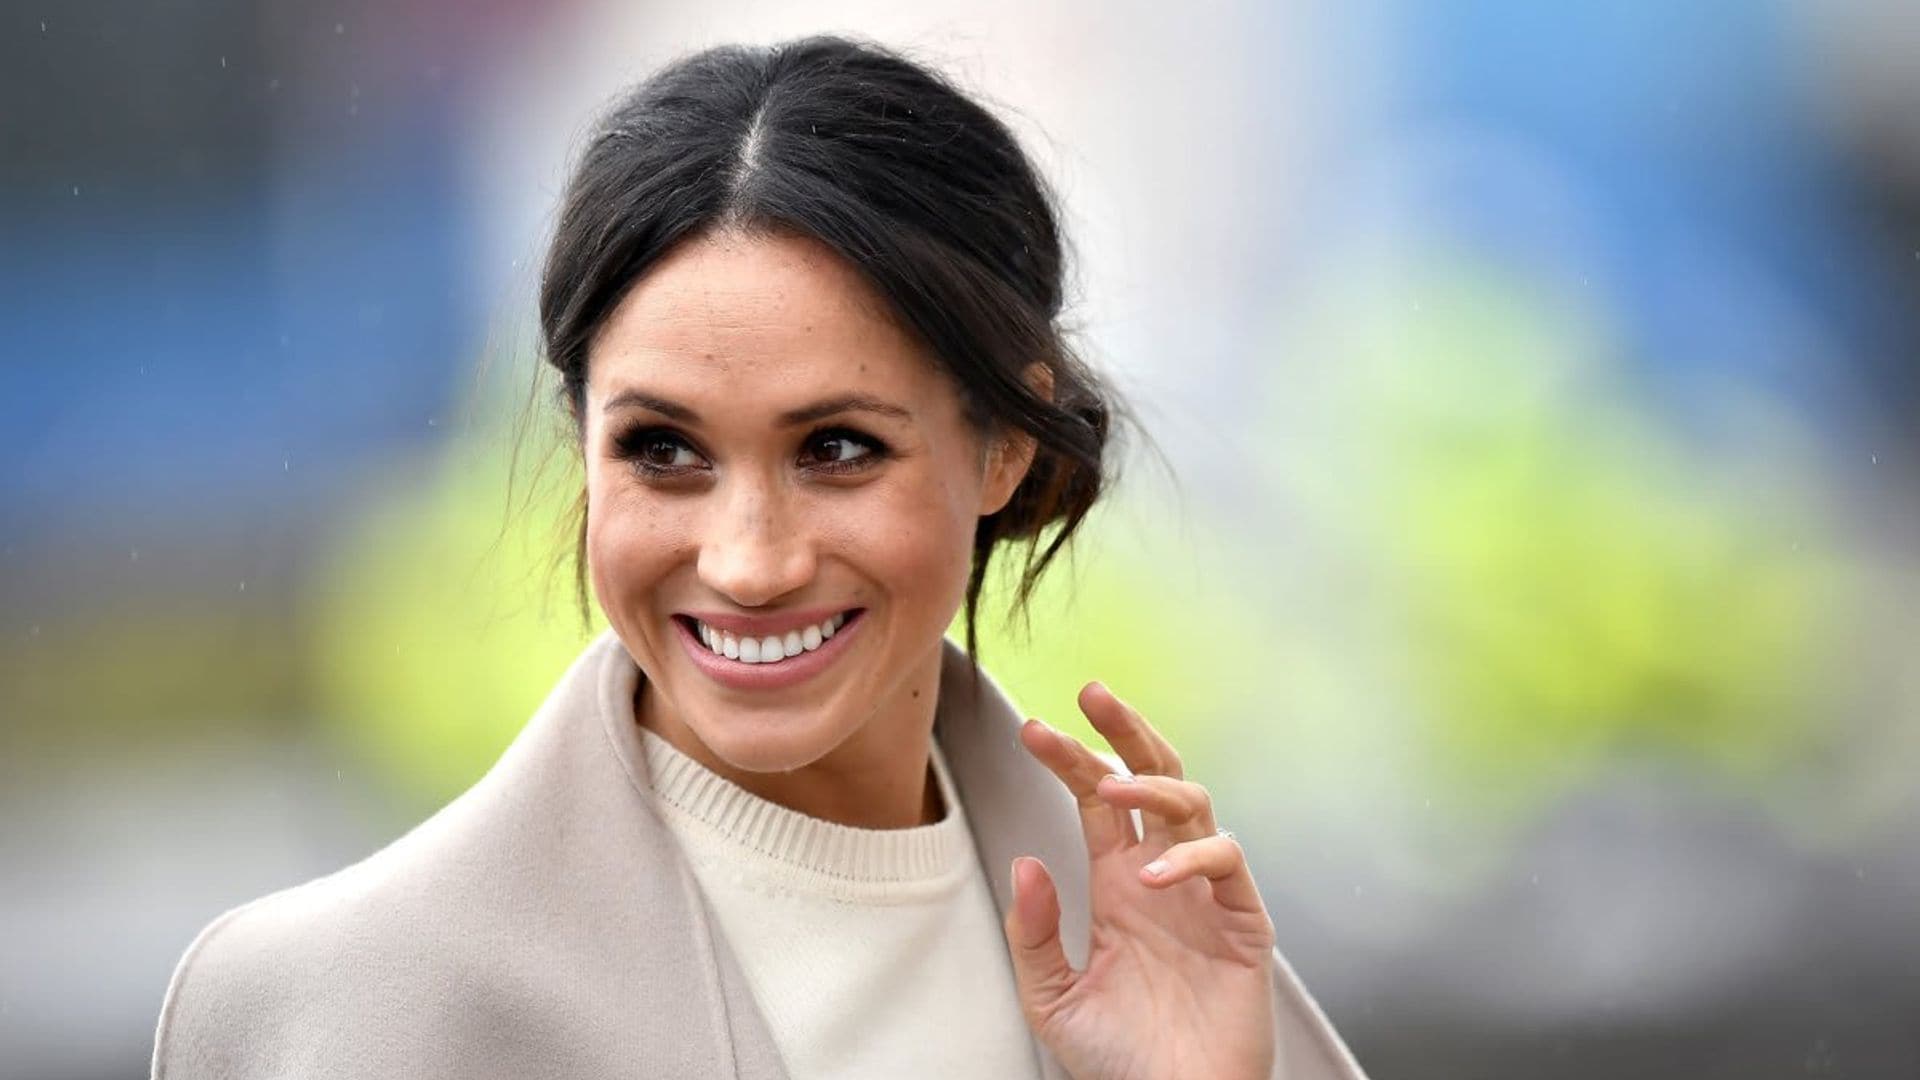 IMDb named Meghan Markle the most popular star in the world